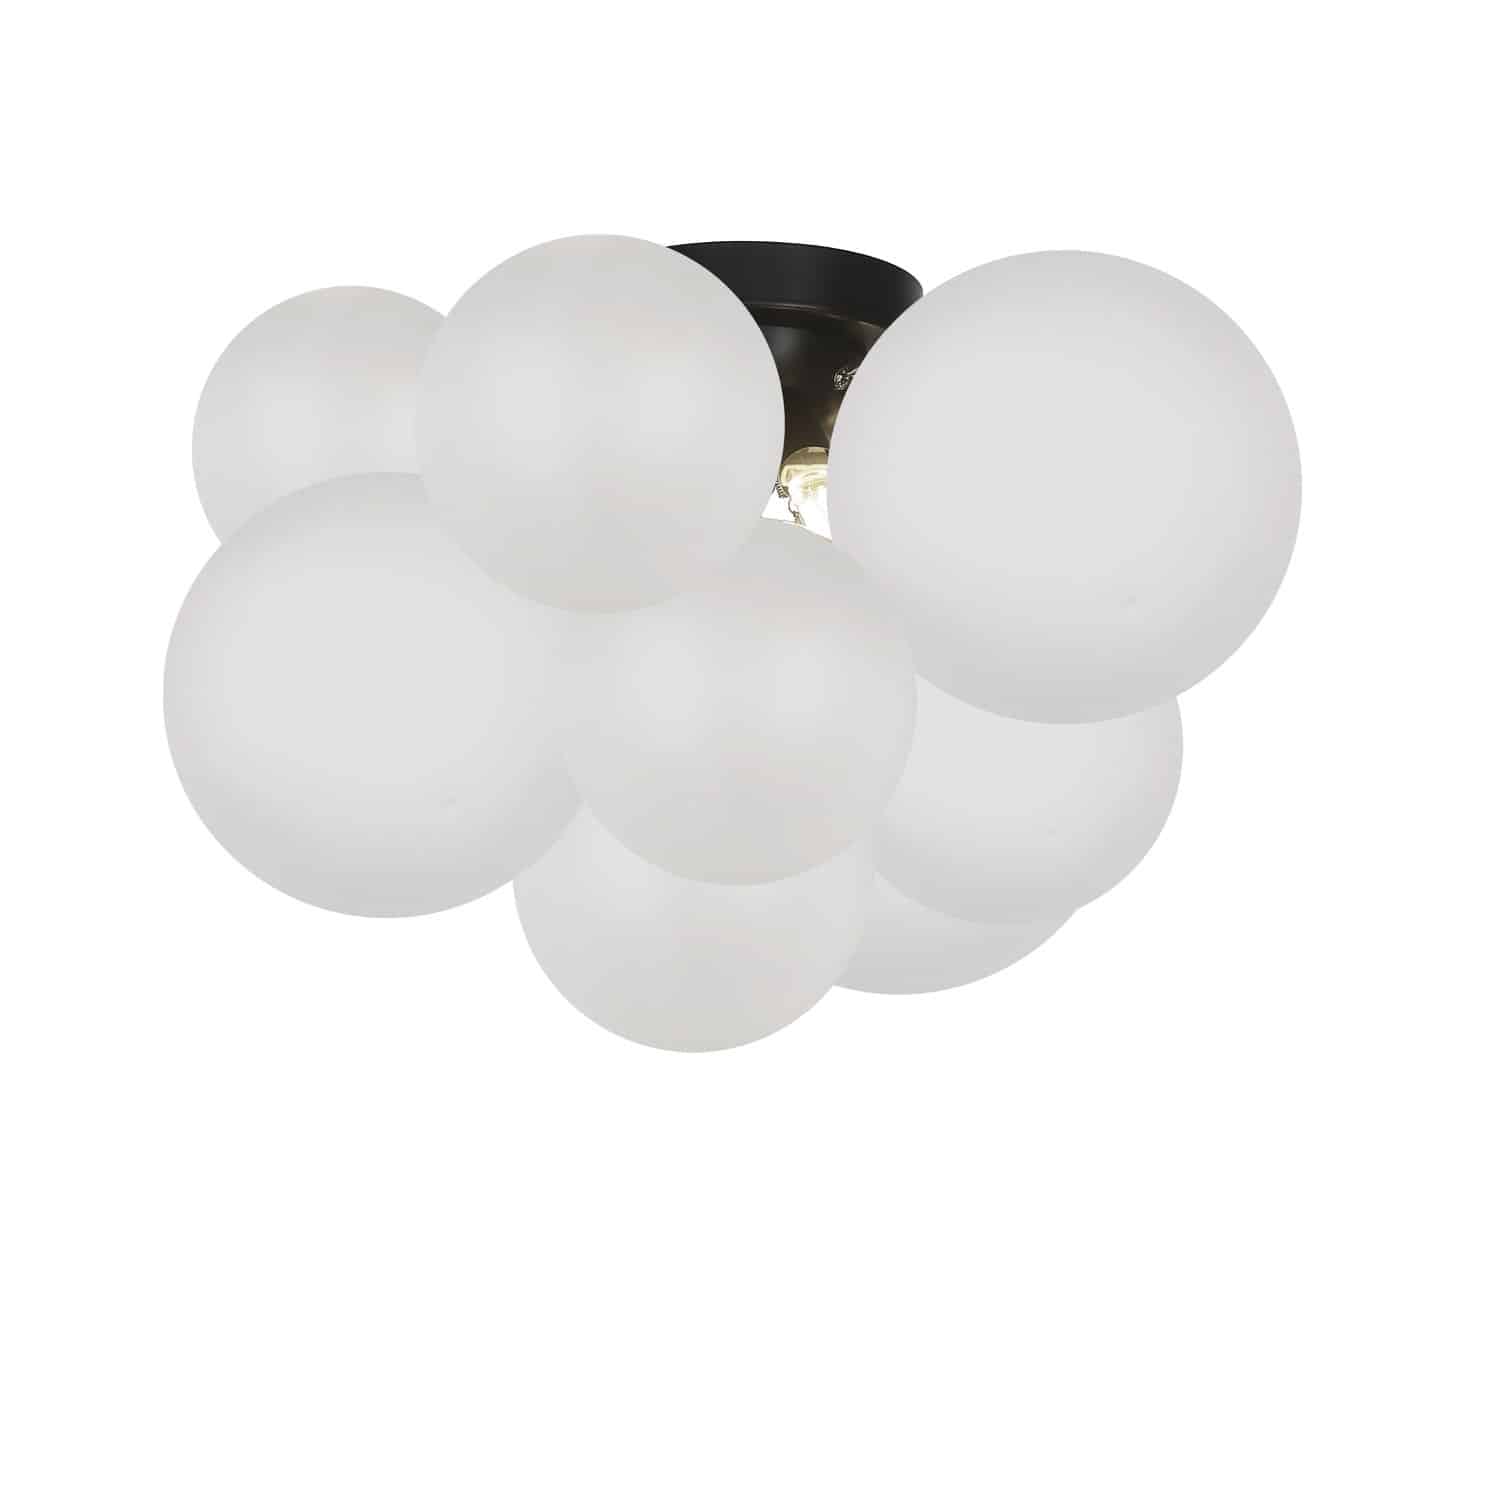 The Miles family of fixtures takes its inspiration from the buoyant appeal of balloons. Available in chandelier or flush mounted configurations, it's a funky take on contemporary designer style. The metal frame is rounded, creating a symmetrical design for either configuration. Light emanates in all directions from large globes, with a frosted finish for a skin-friendly glow. Miles lighting adds a bold stroke to contemporary décor schemes, and delightful curved lines to contrast minimalist furnishings. Its striking look is suitable for living rooms, bedrooms or an office setting.